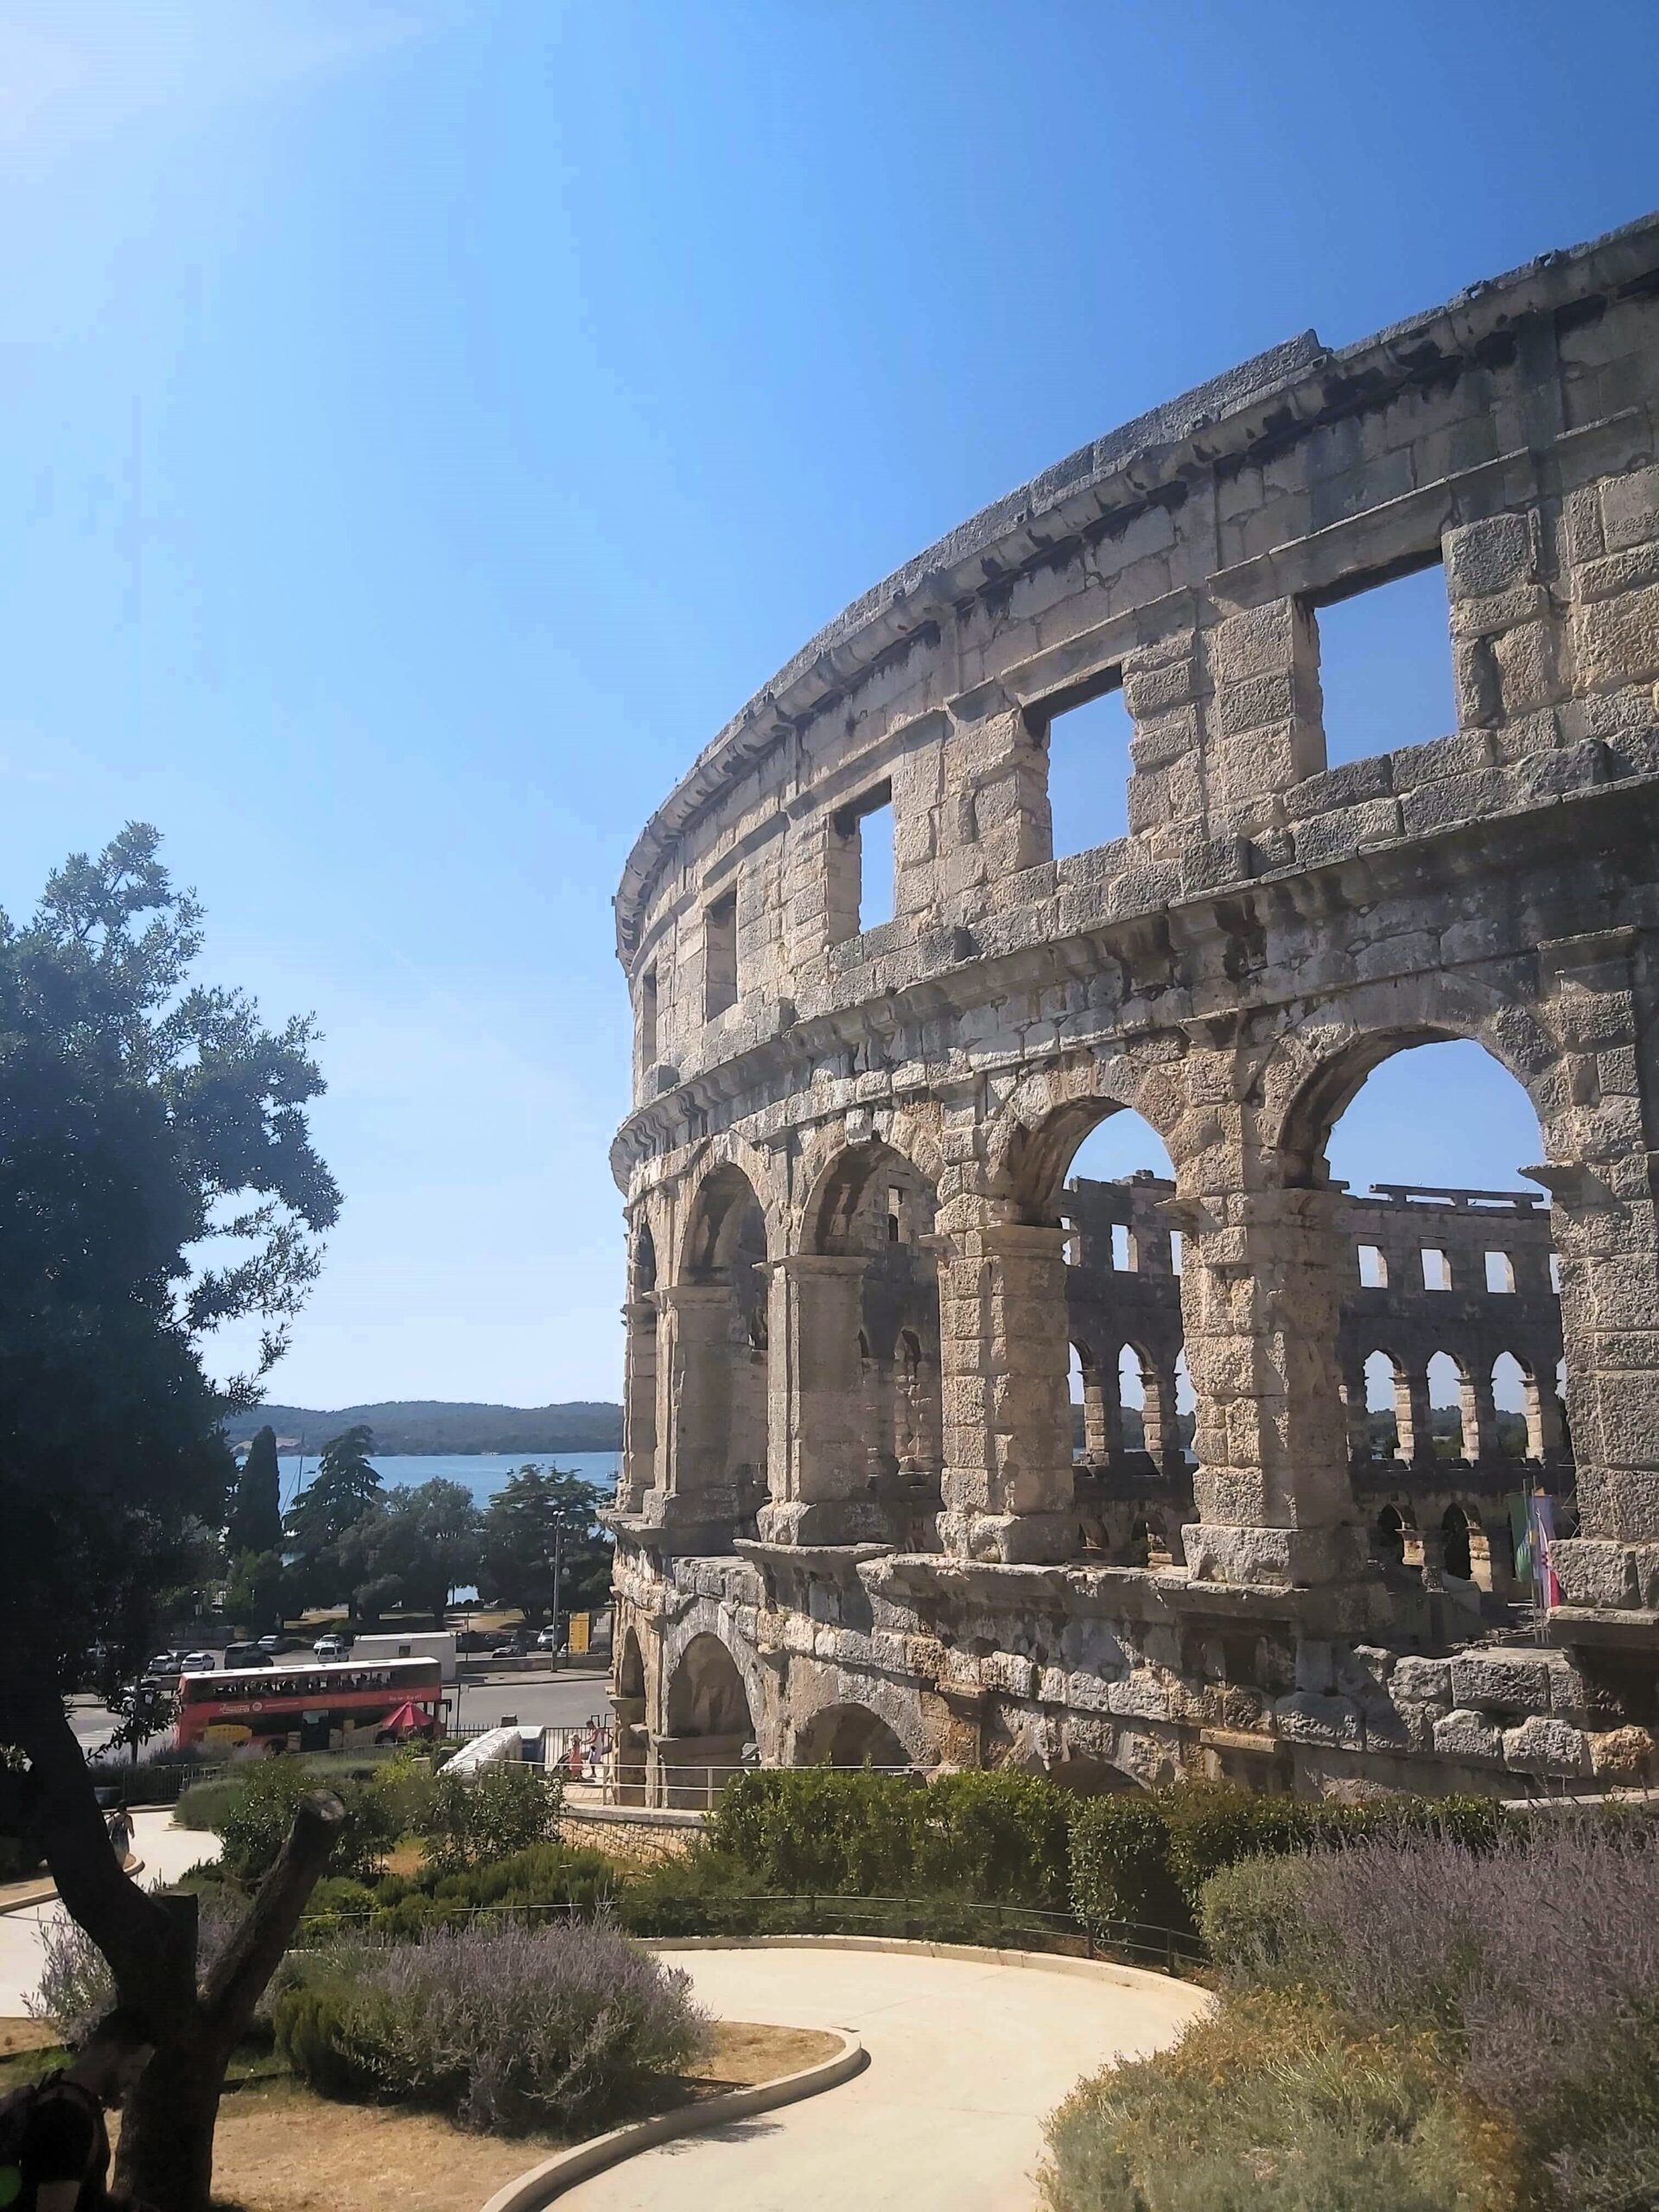 The Roman Amphitheatre with trees and a sea view in the background in Pula, Croatia